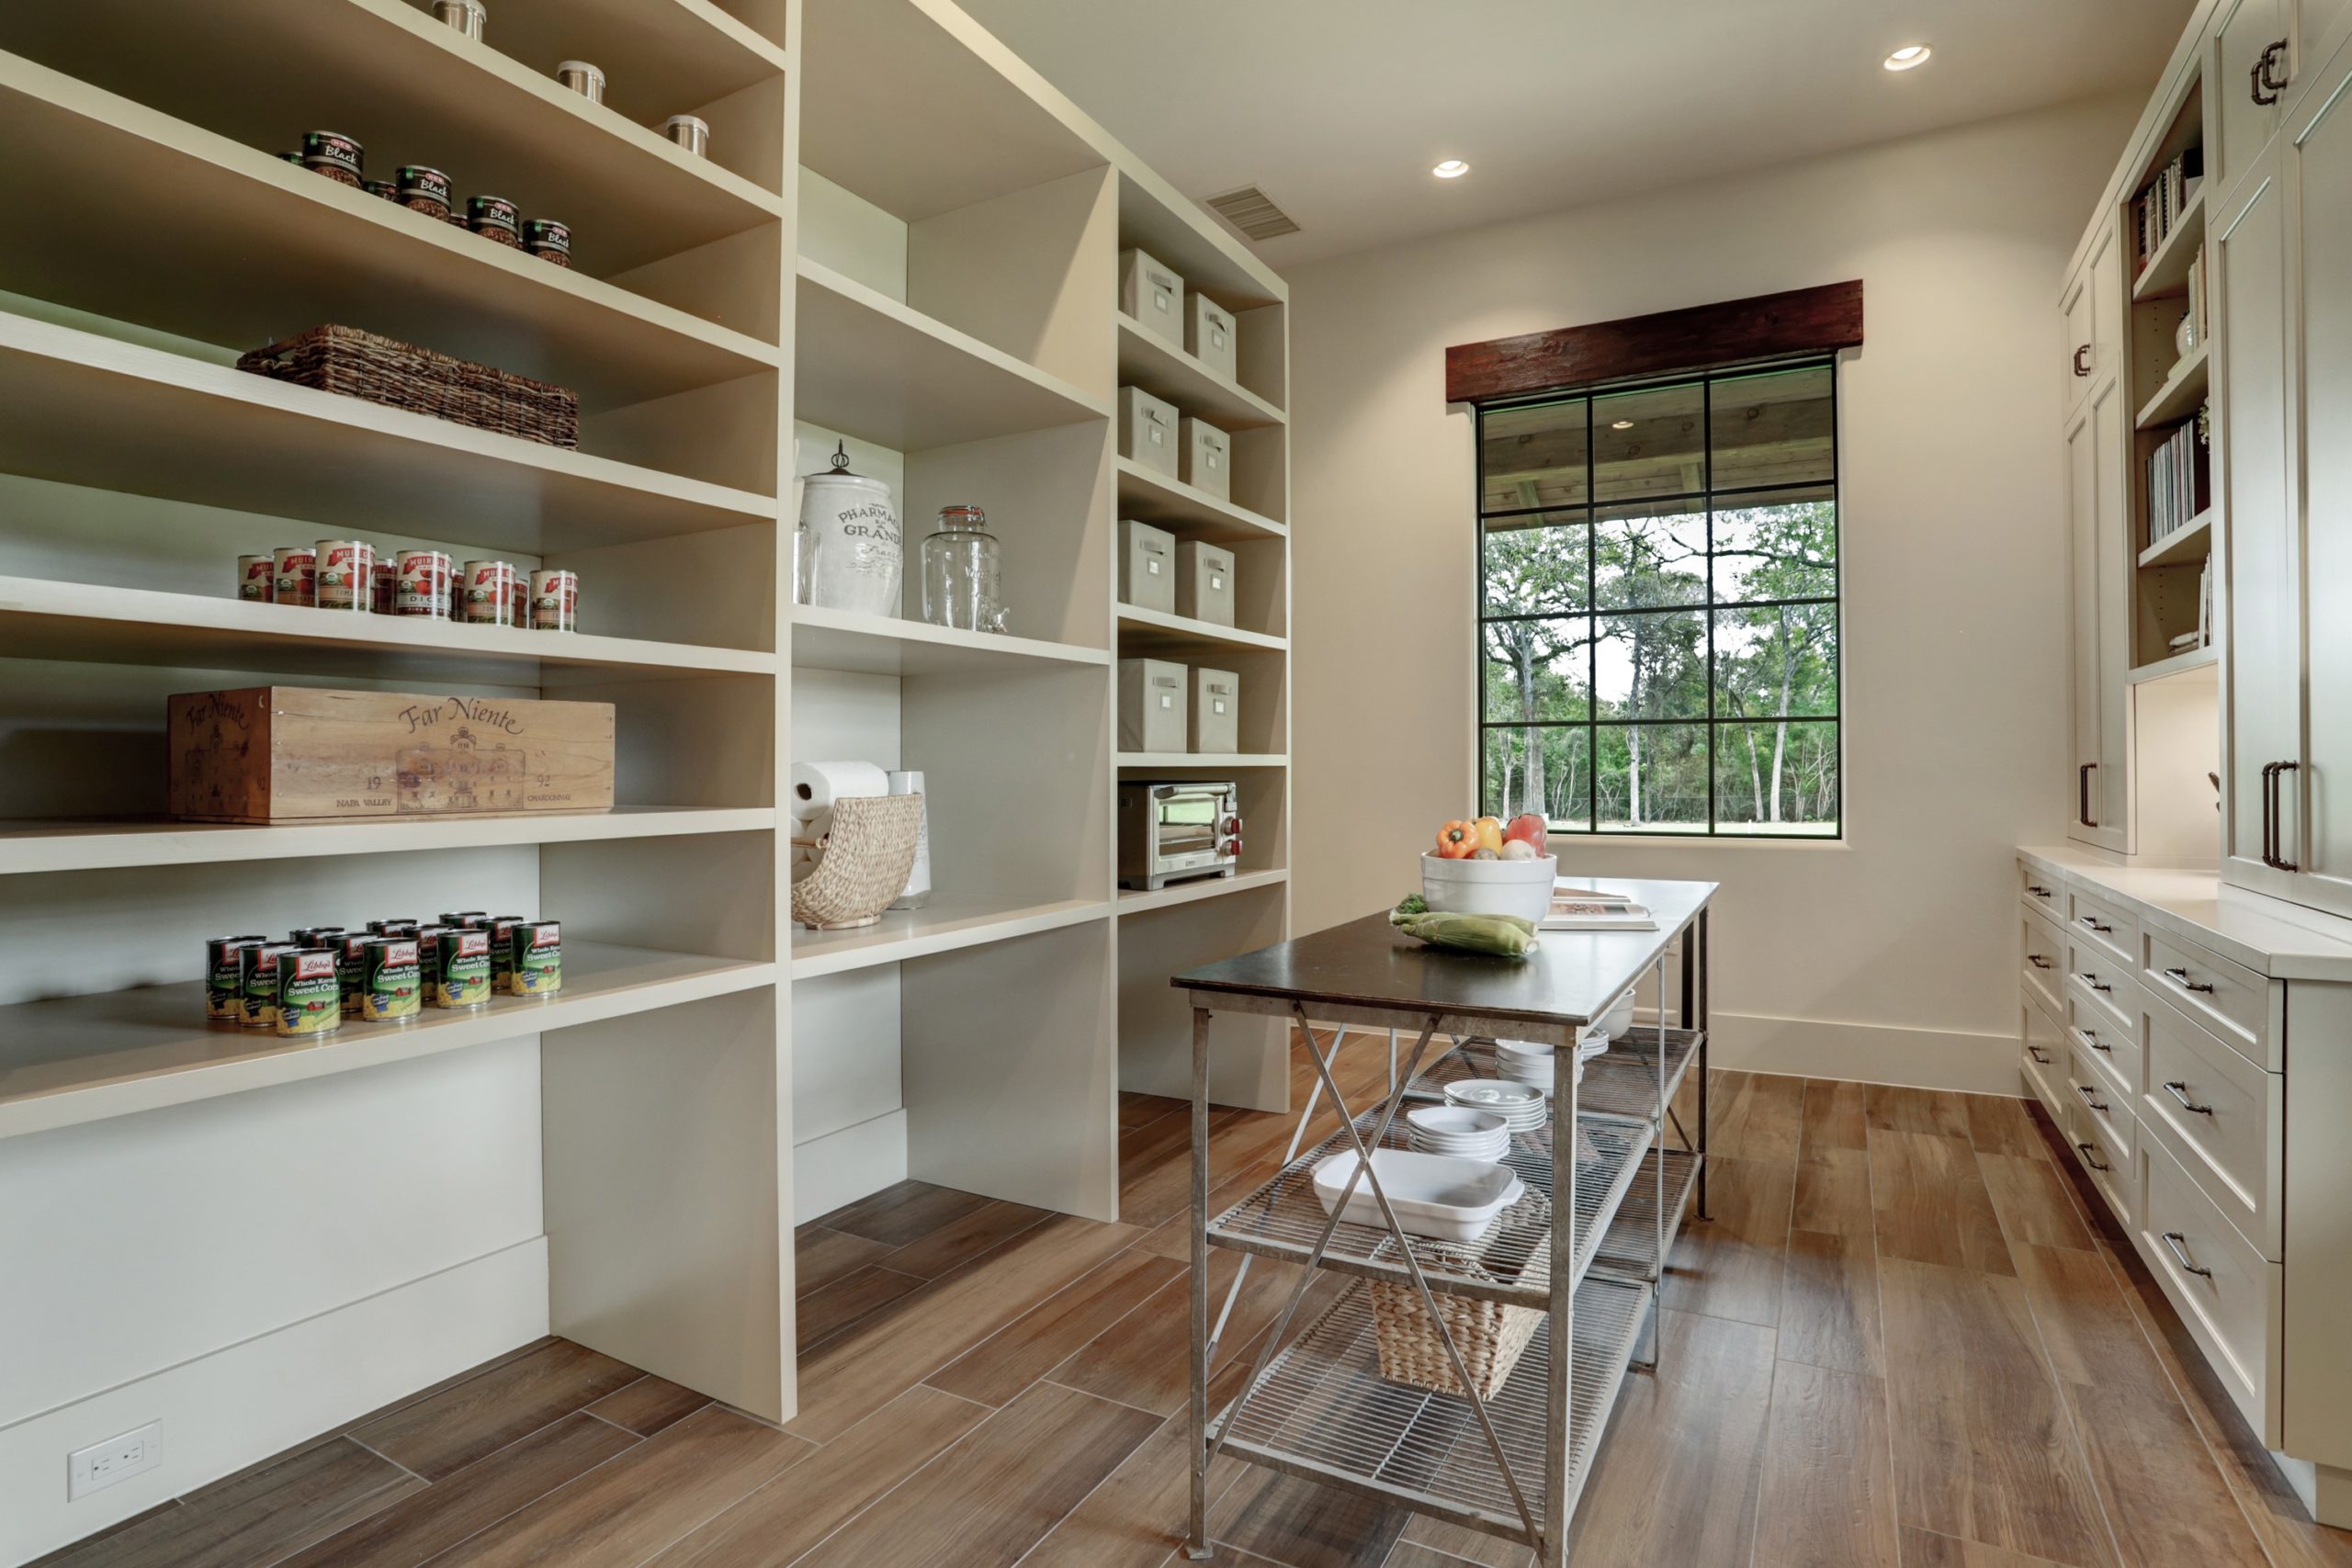 Large family sized walk-in pantry